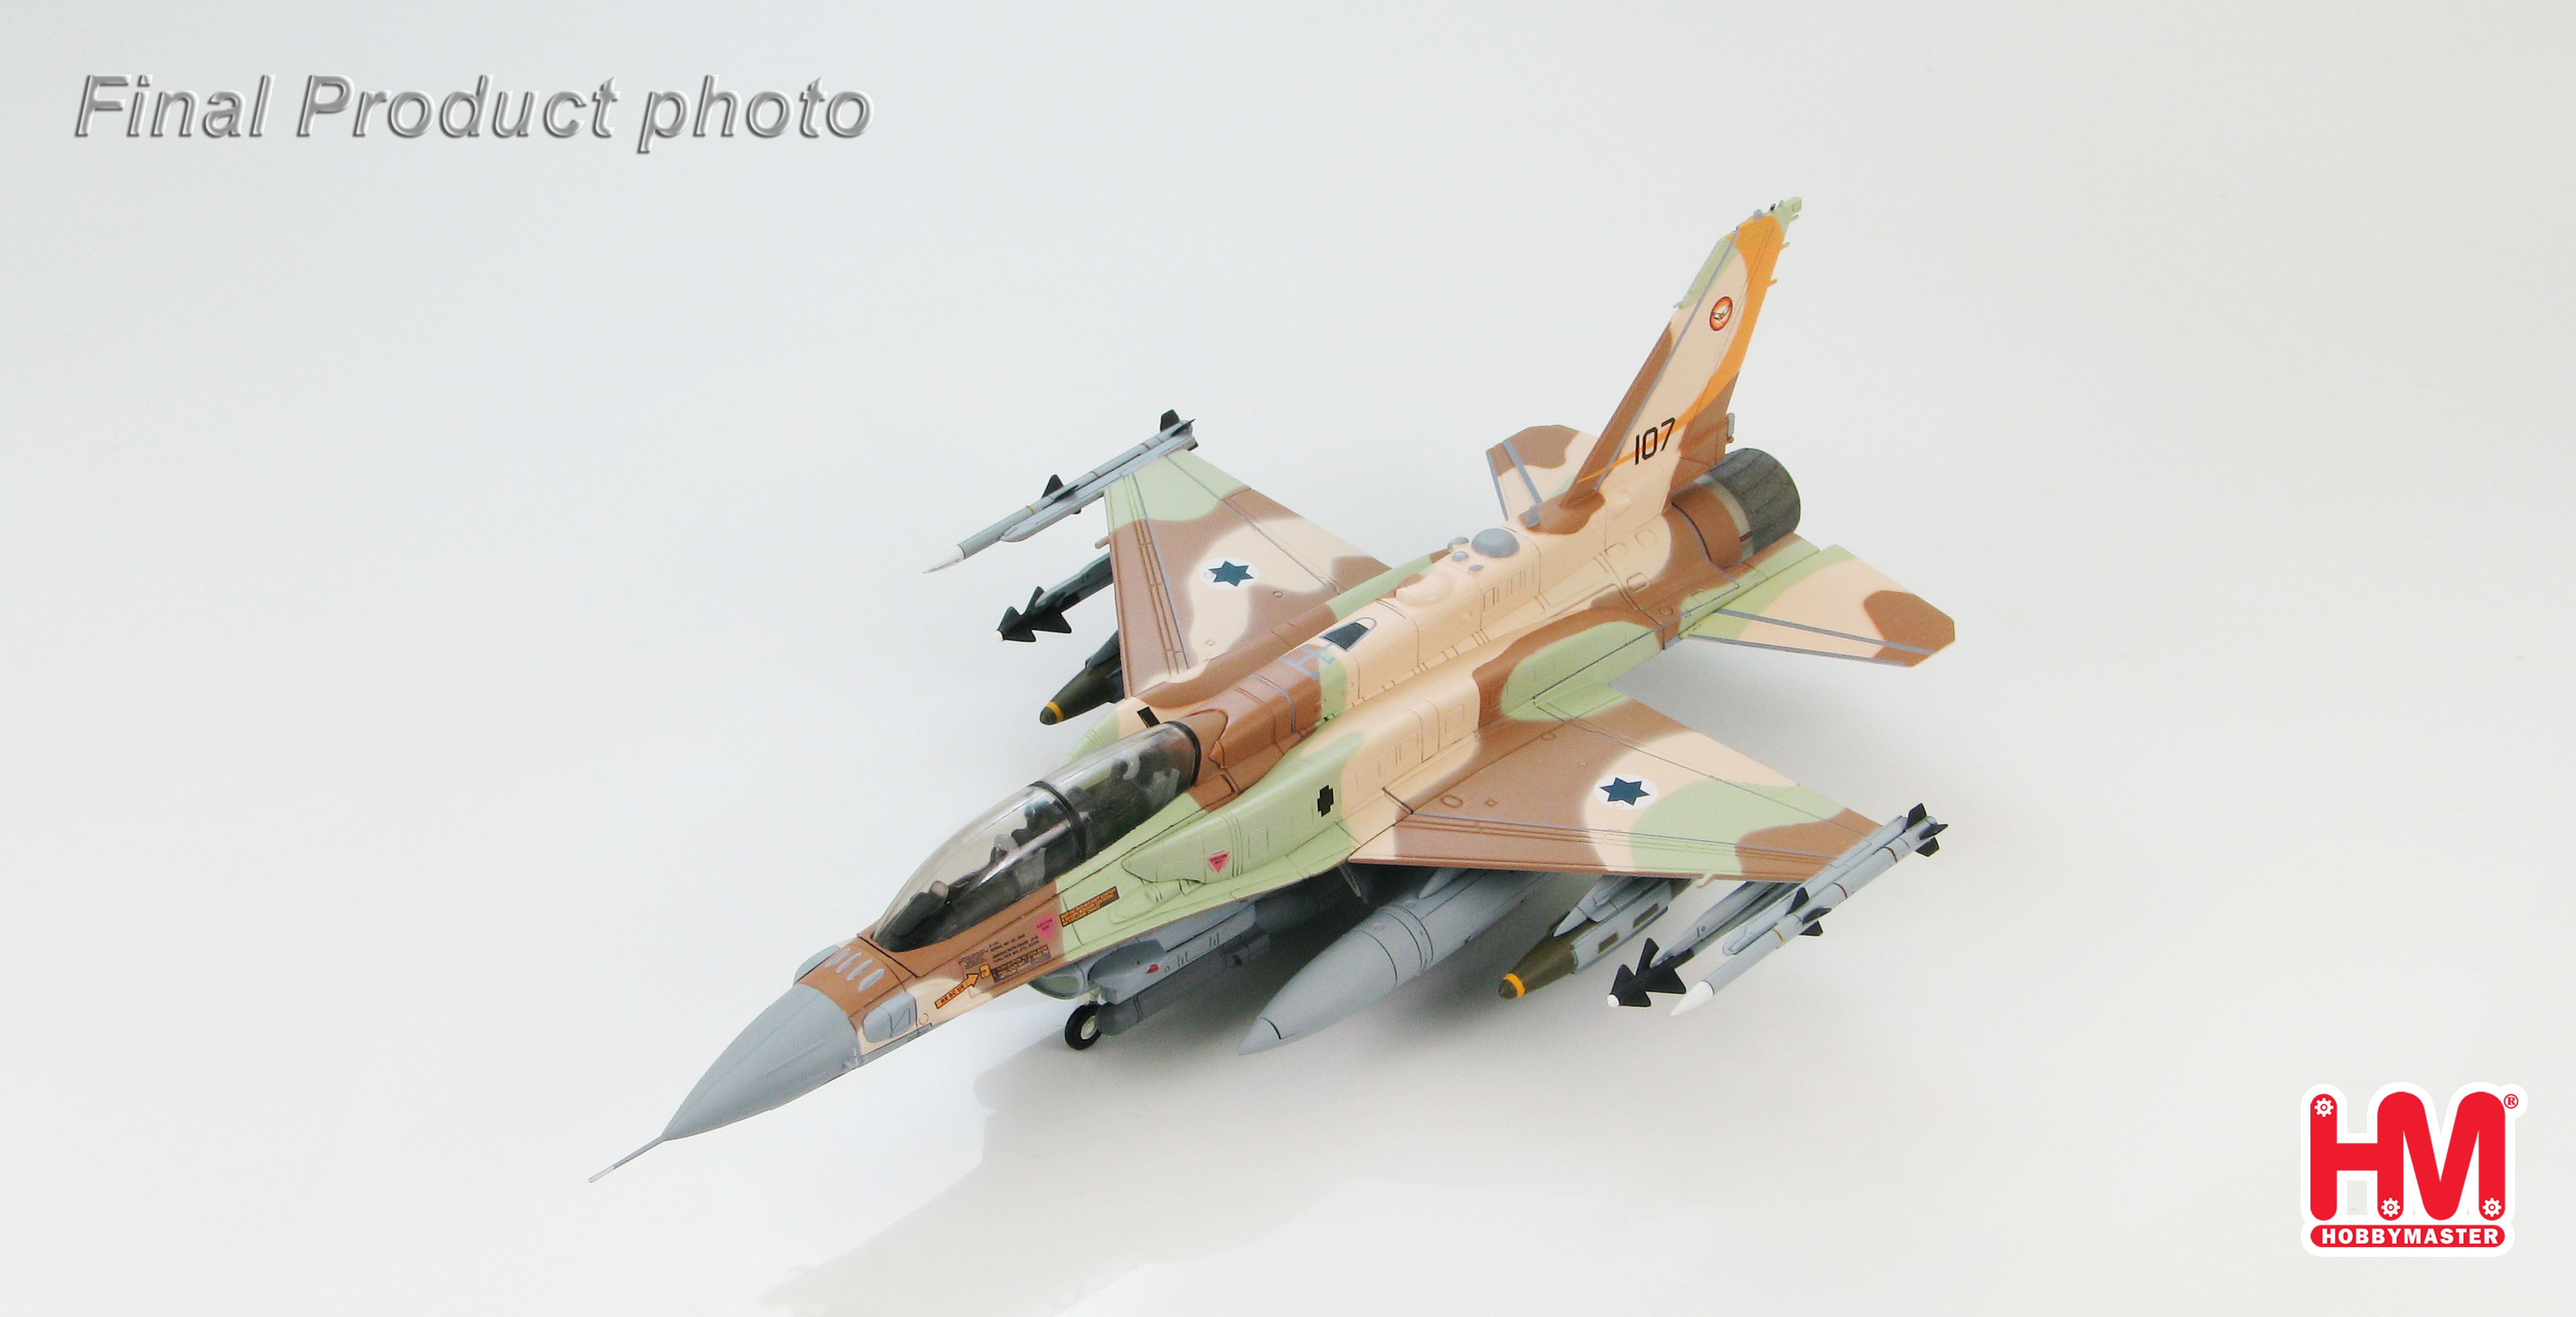 1/72 Scale Israeli Air Force Fighter F-16I Plane Model Diecast Aircraft w/ Stand 